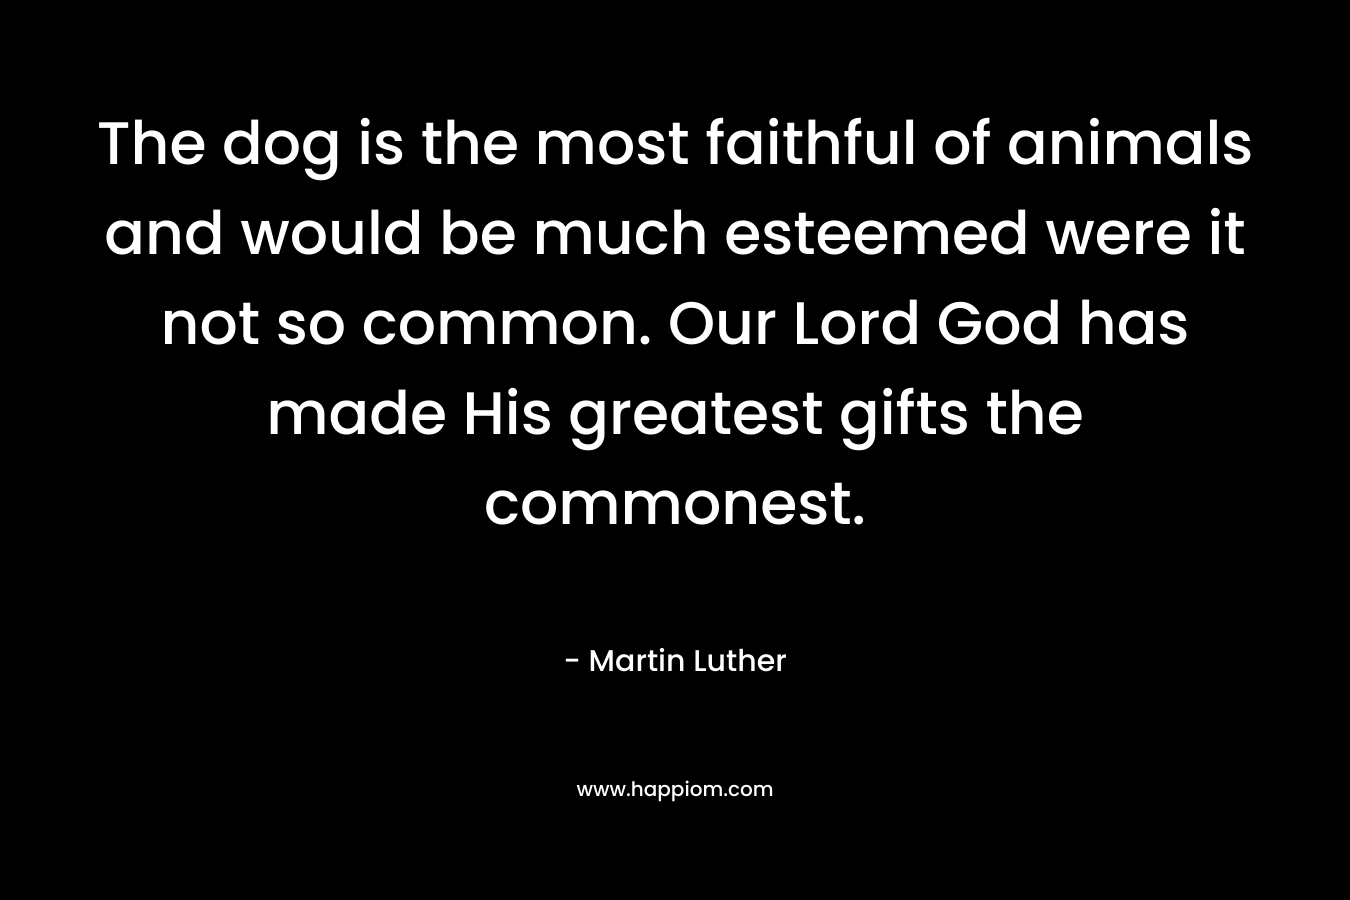 The dog is the most faithful of animals and would be much esteemed were it not so common. Our Lord God has made His greatest gifts the commonest. – Martin Luther